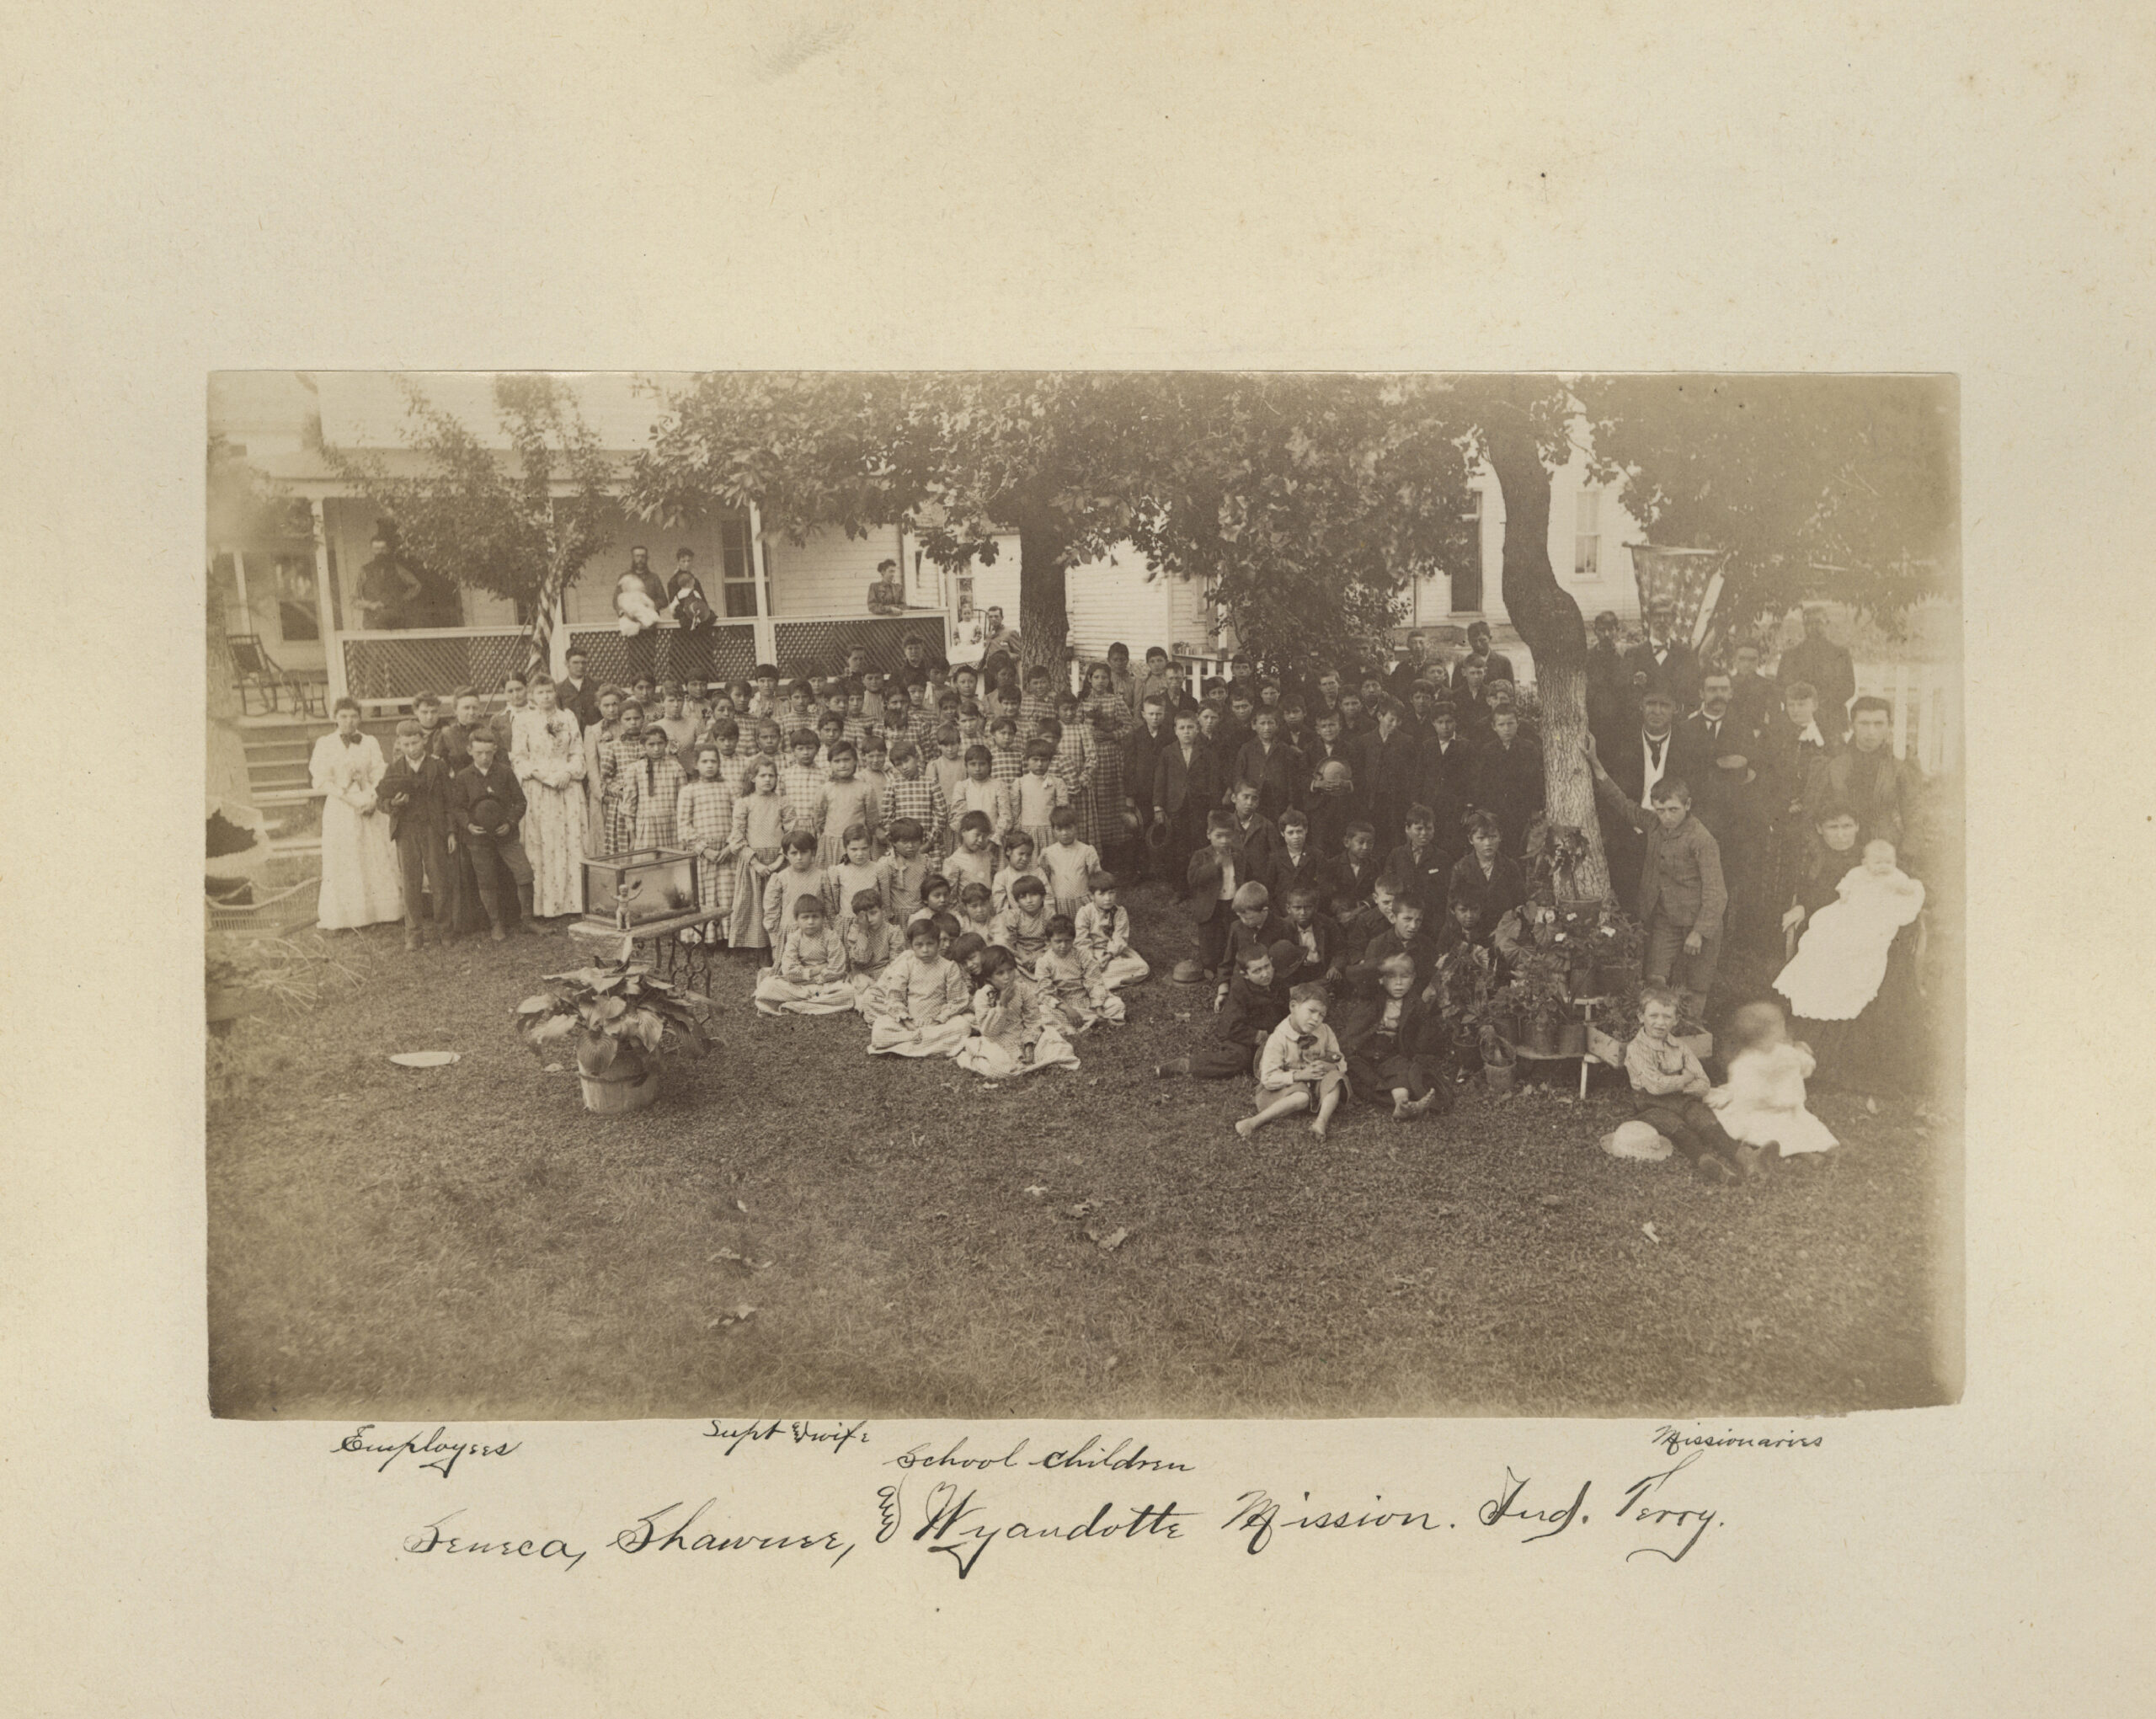 In this photo taken between 1869 and 1895, provided by the Quaker and Special Collections at Haverford College, school children of the Seneca, Shawnee, and Wyandotte Mission Indian Territory, gather for a portrait in Wyandotte, Okla. This image is one of 20,000 archival pages related to boarding schools for Native youths operated by the Quakers that will be digitized by the National Native American Boarding School Healing Coalition. (Quaker and Special Collections, Haverford College via AP)